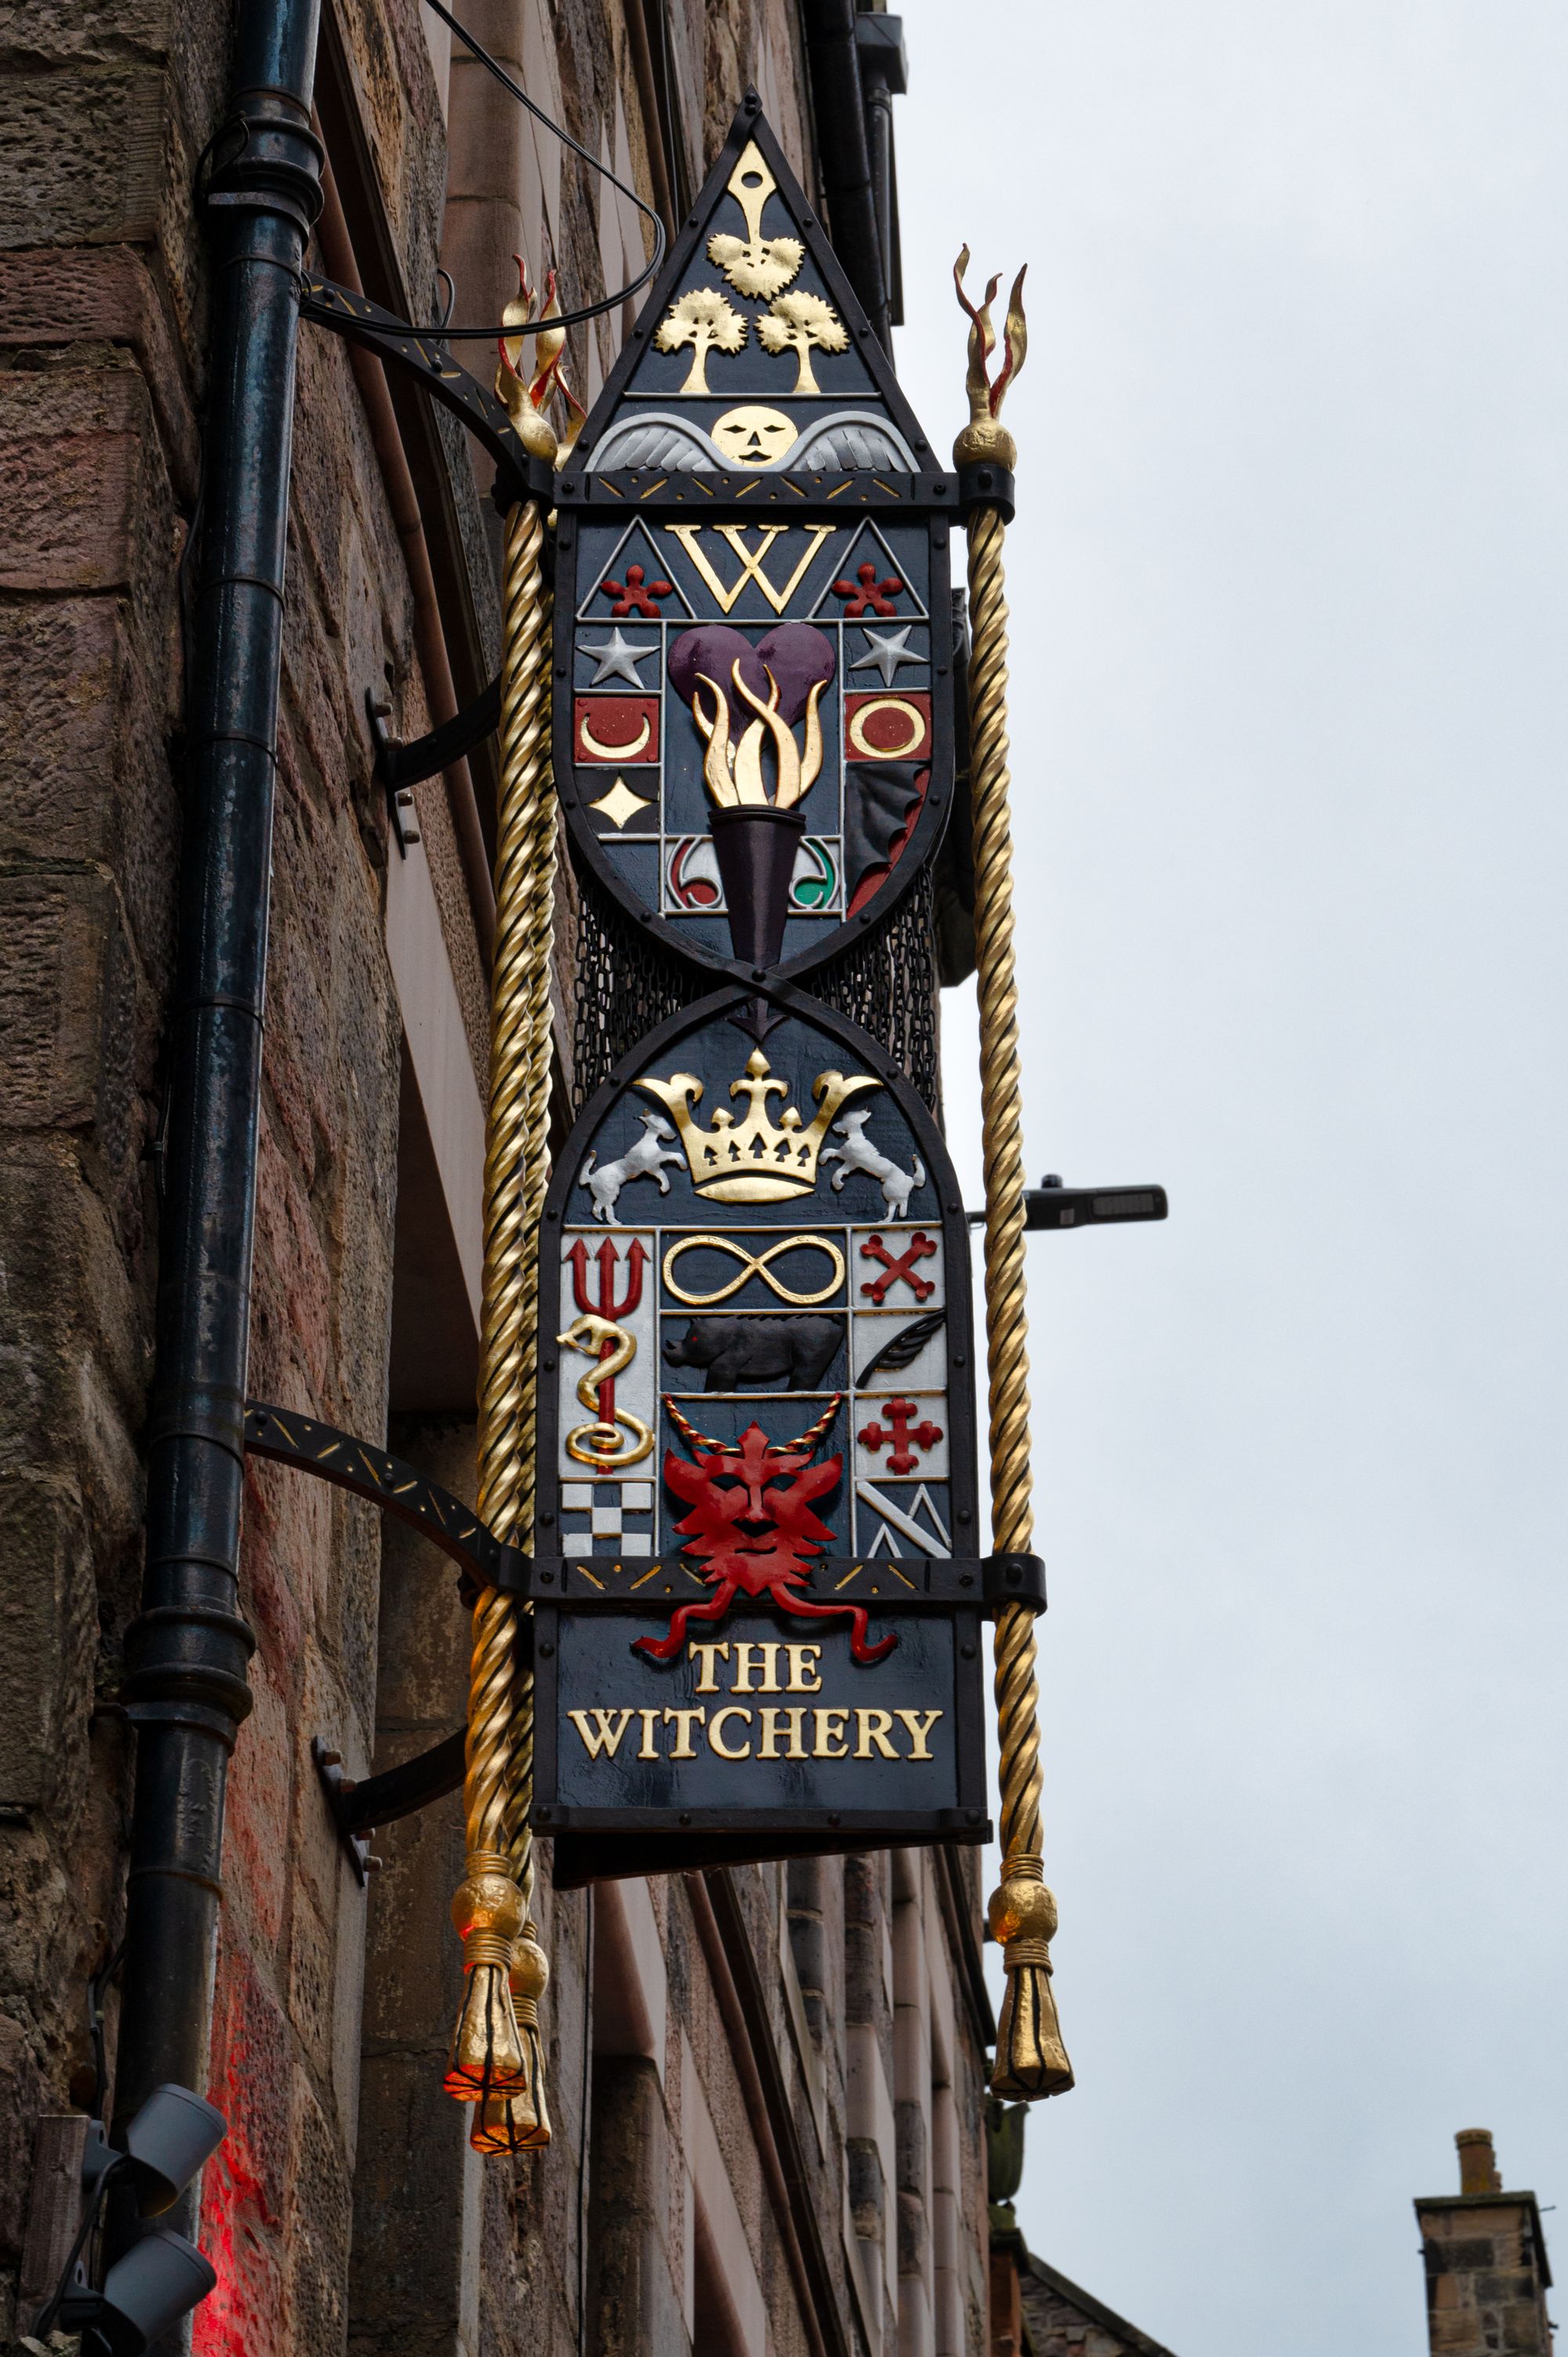 The Witchery By The Castle Restaurant